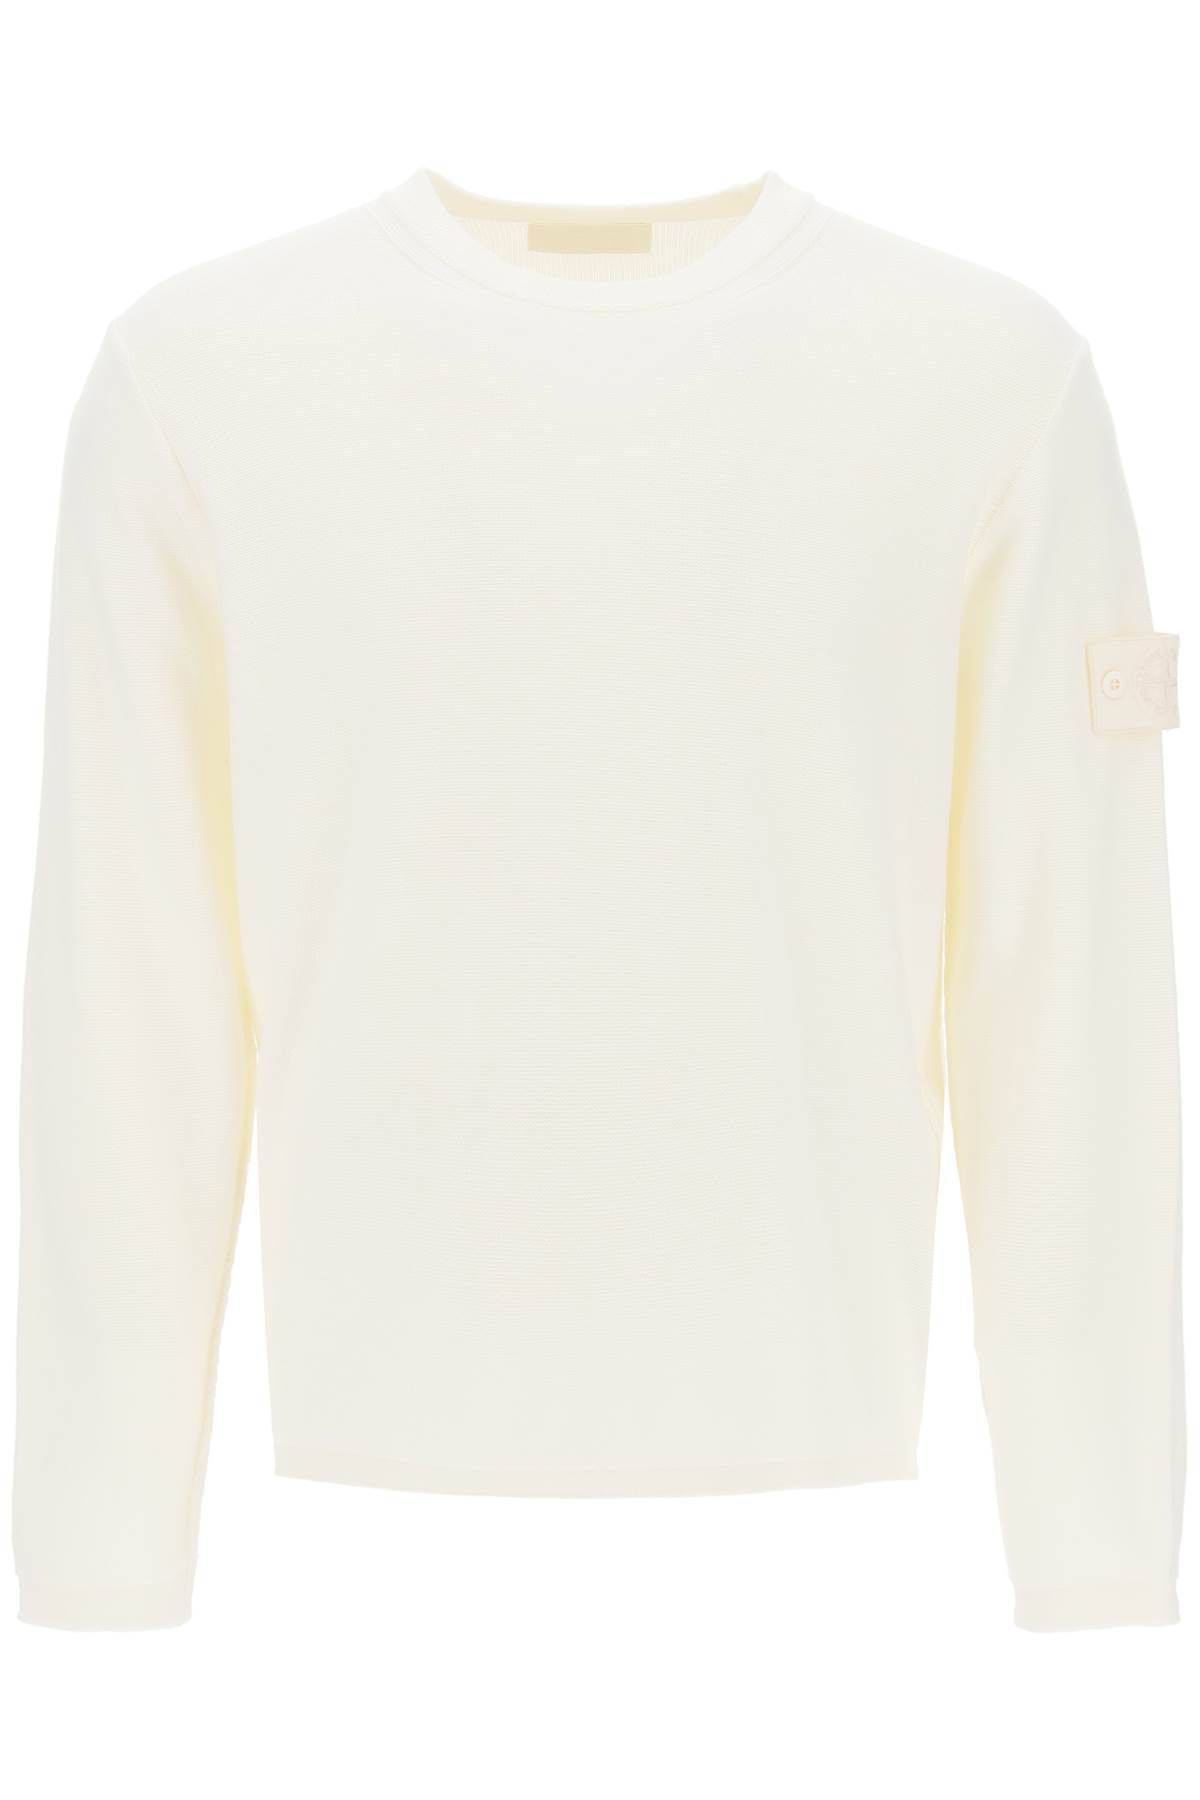 Stone Island Cotton And Cashmere Ghost Piece Pullover In White